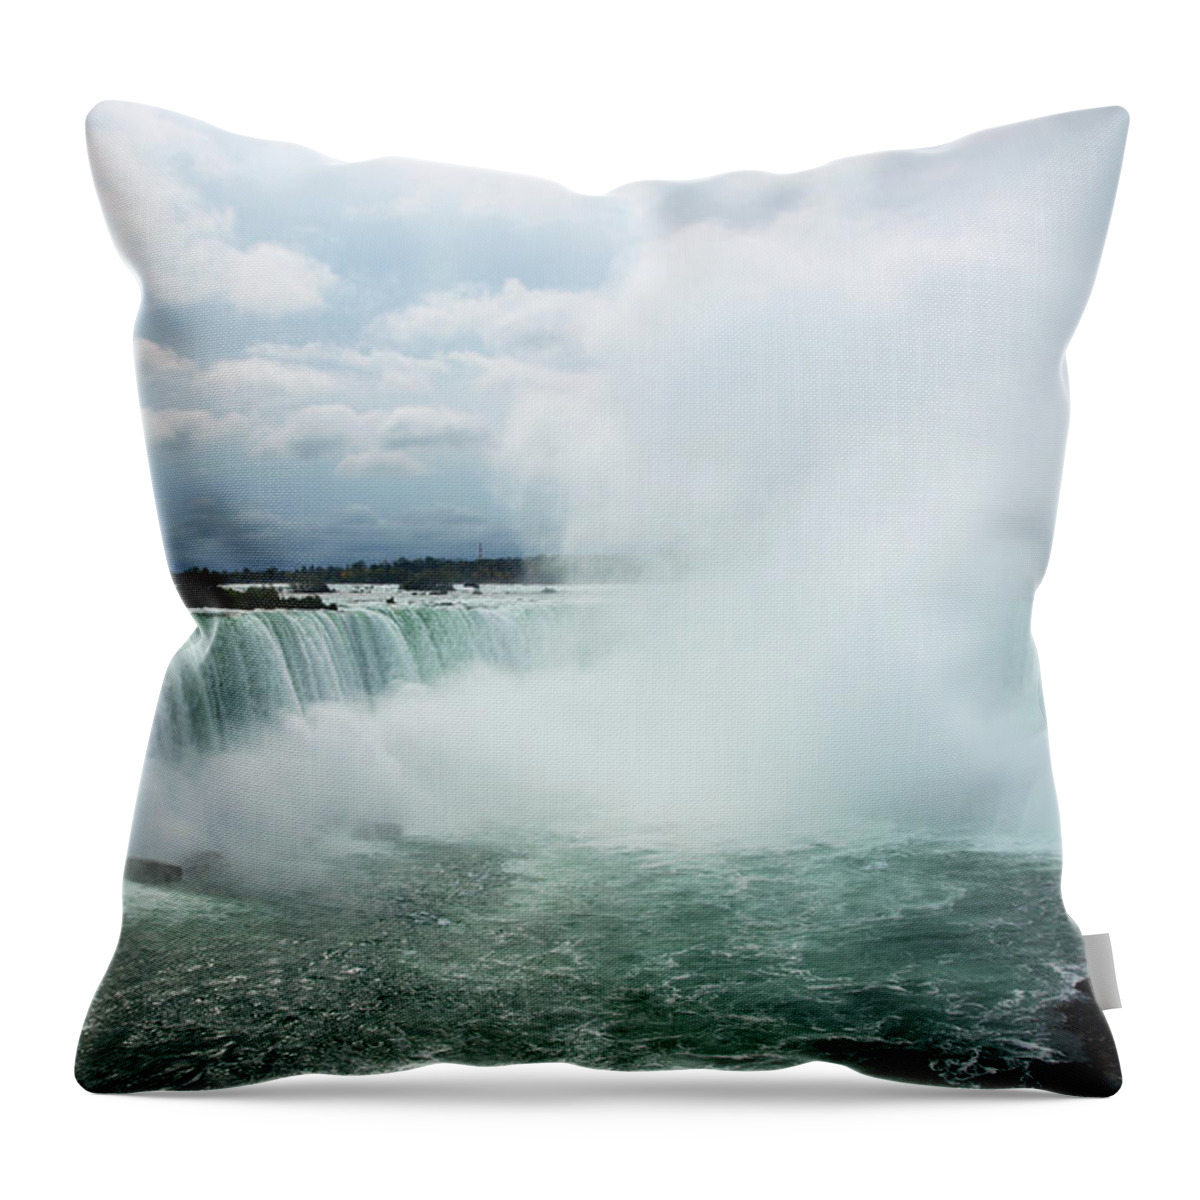 Niagara Falls Throw Pillow featuring the photograph Horseshoe Falls by Mary Capriole